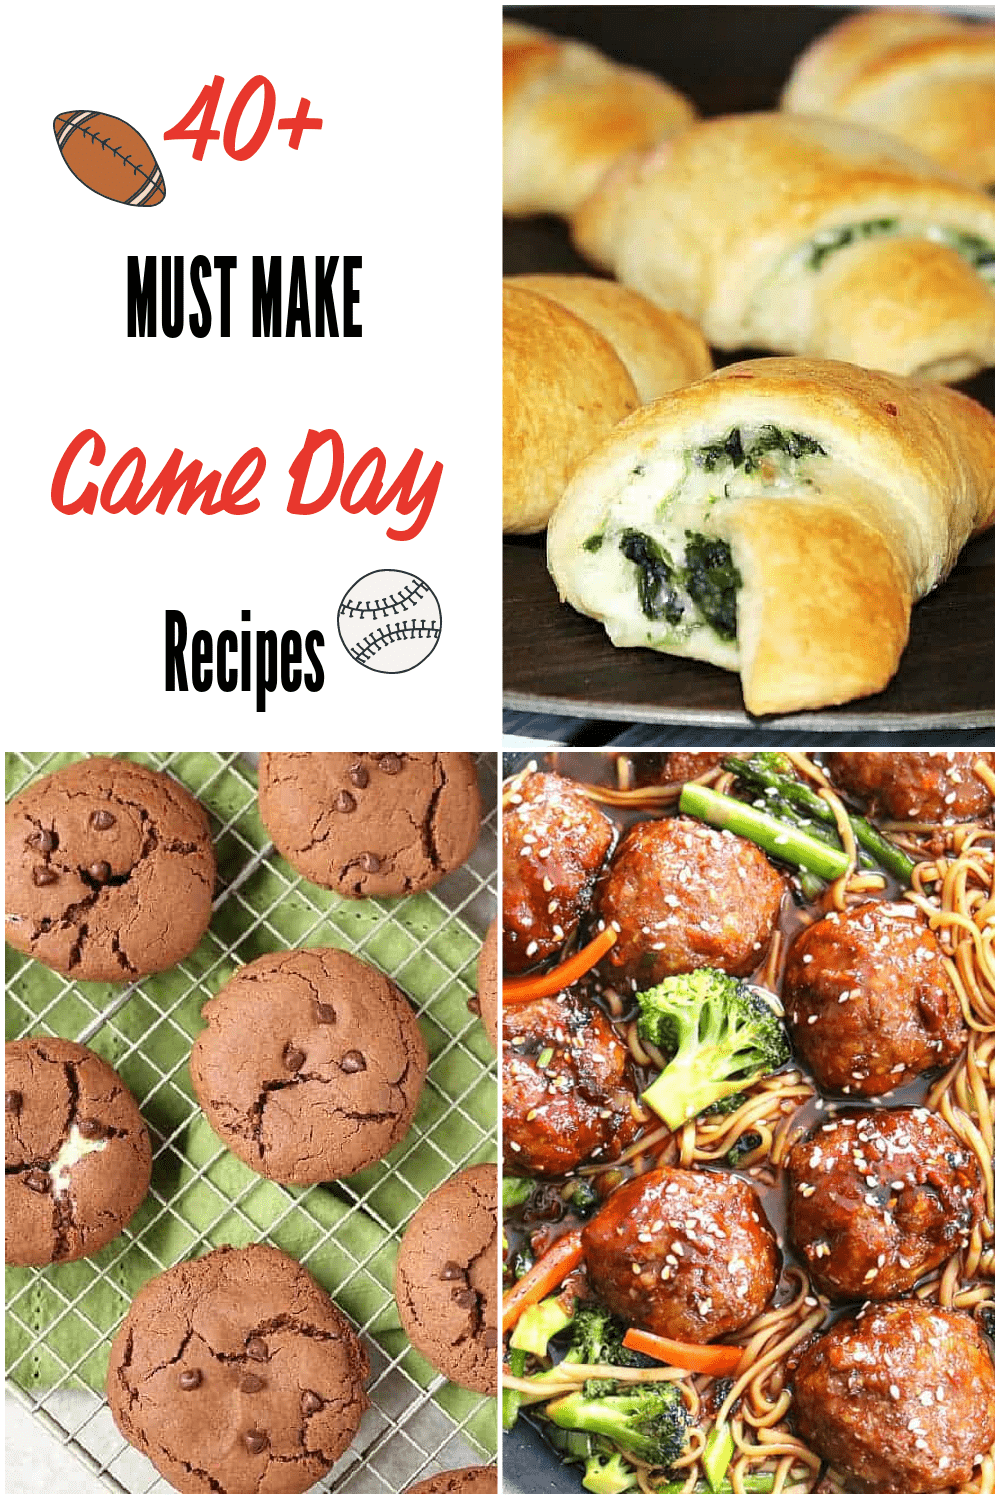 MUST MAKE GAME DAY RECIPES IDEAS.